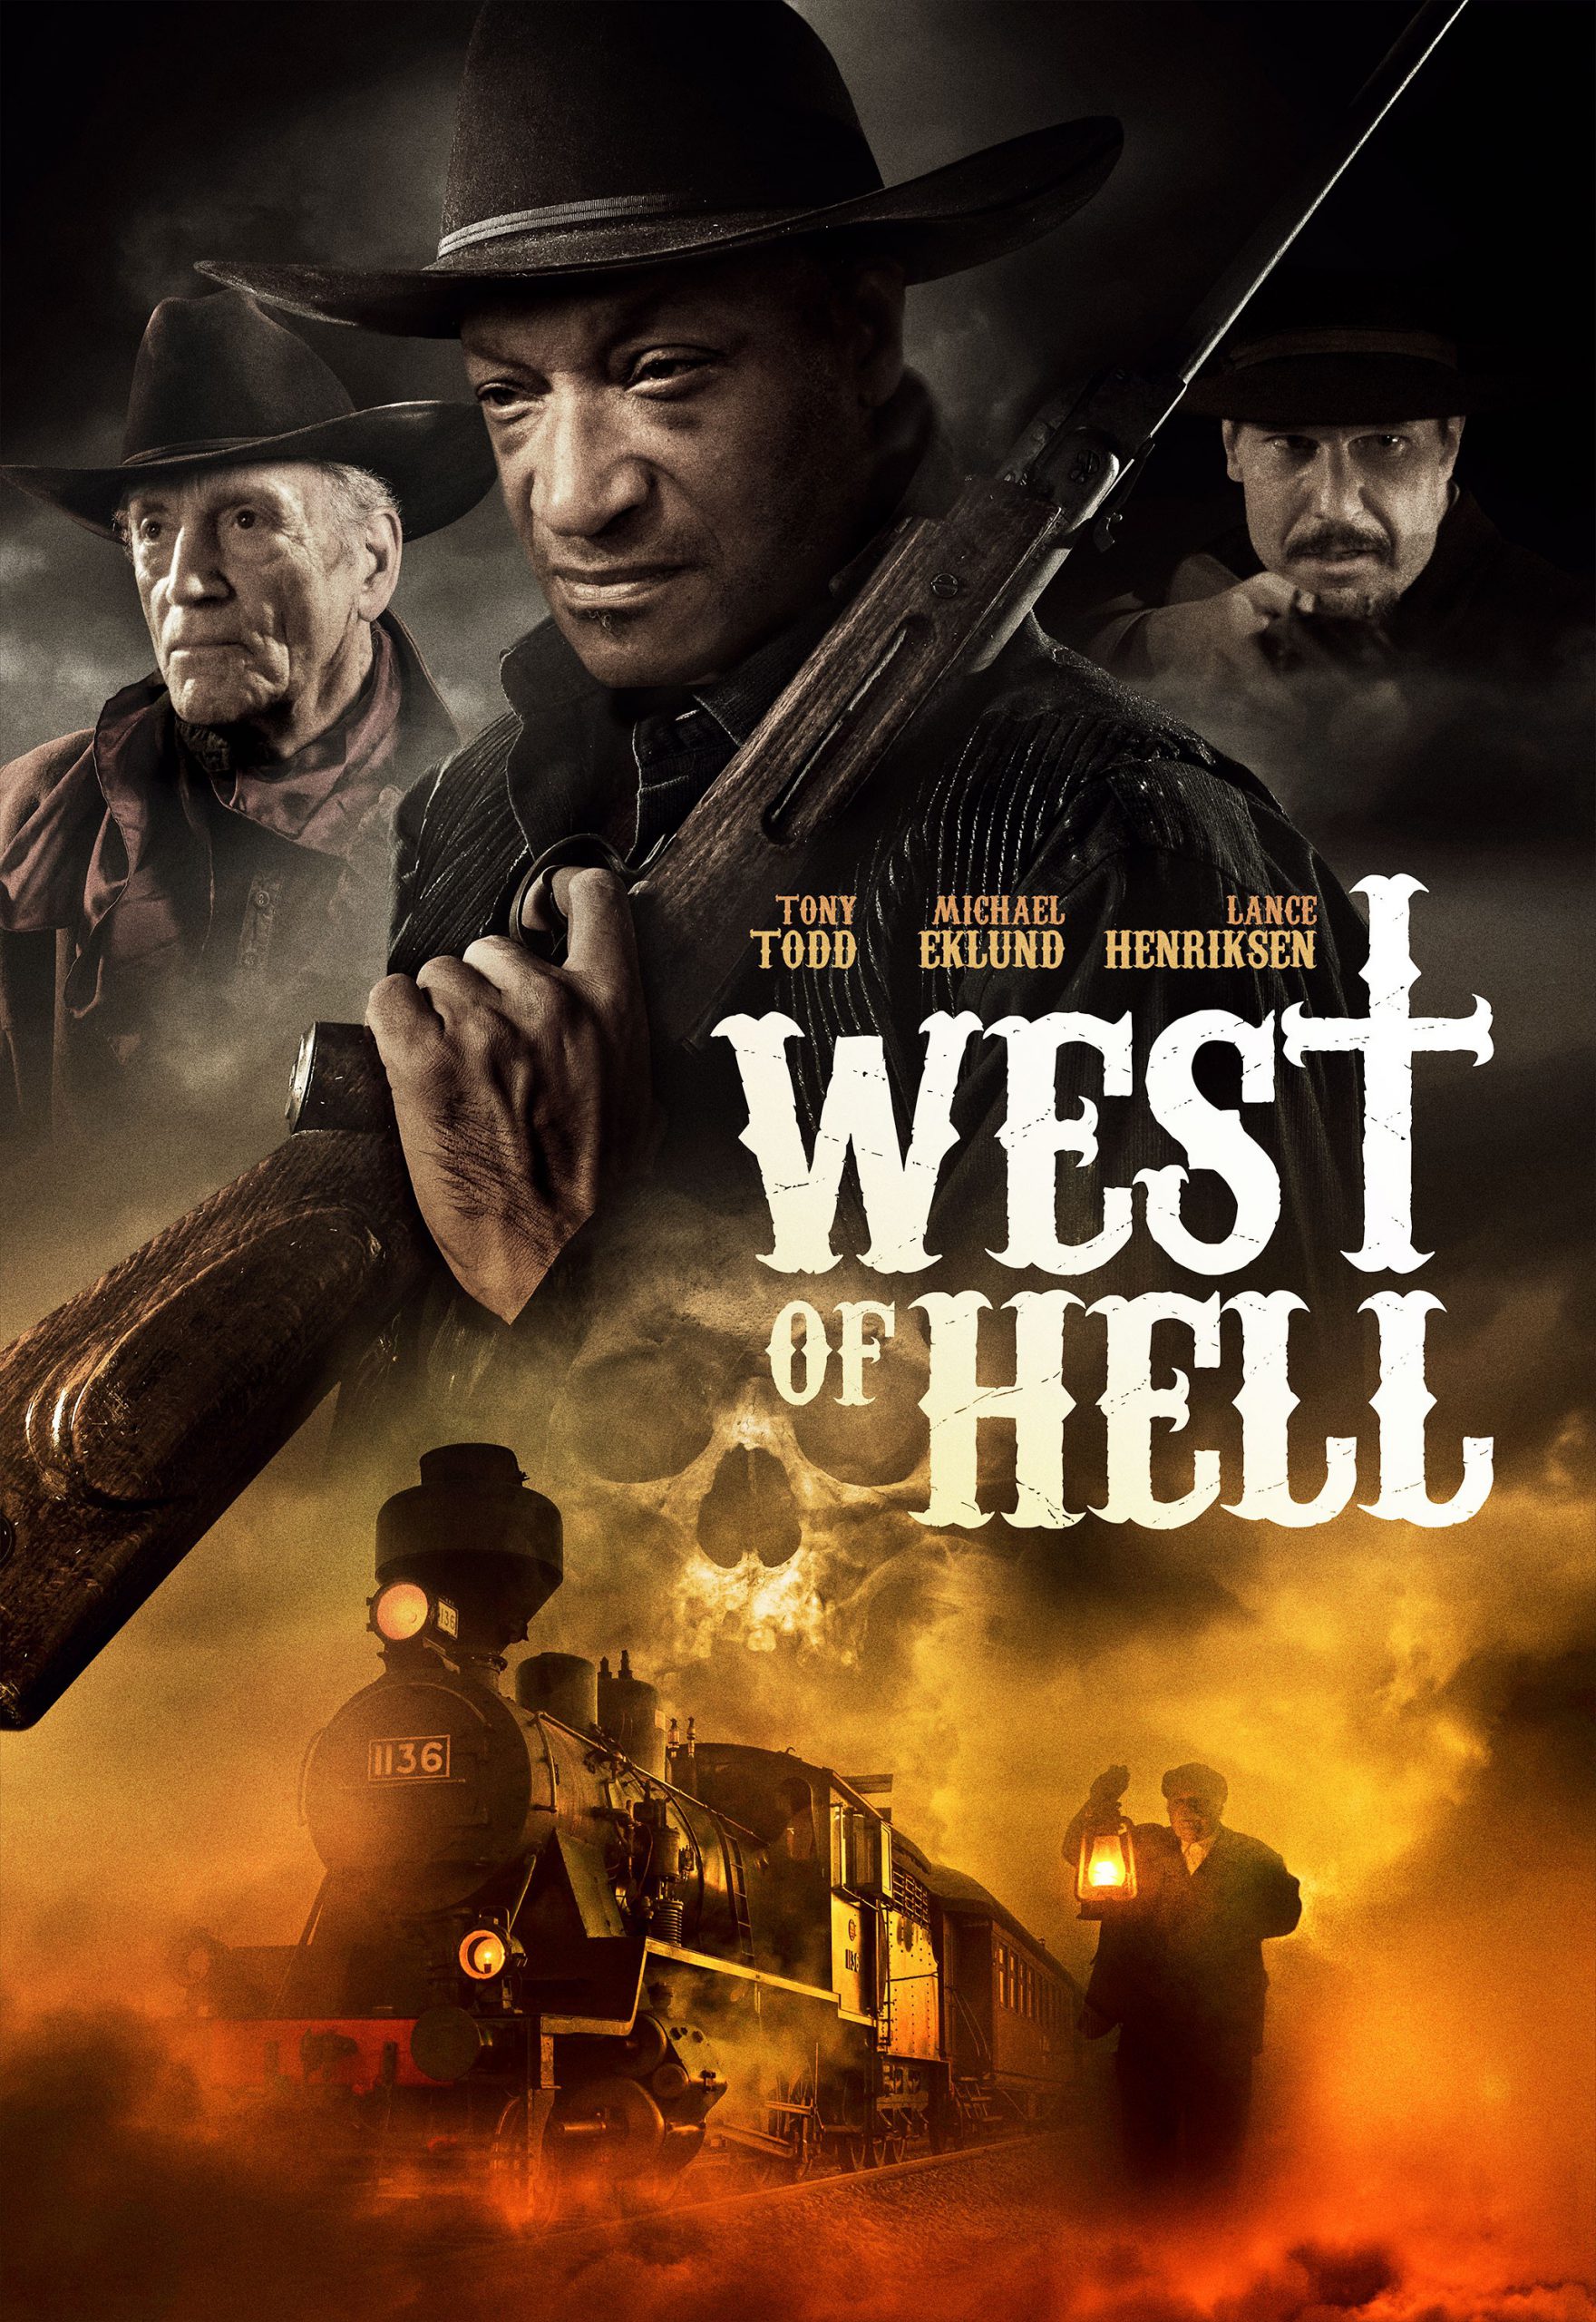 West of Hell [HD] (2021)